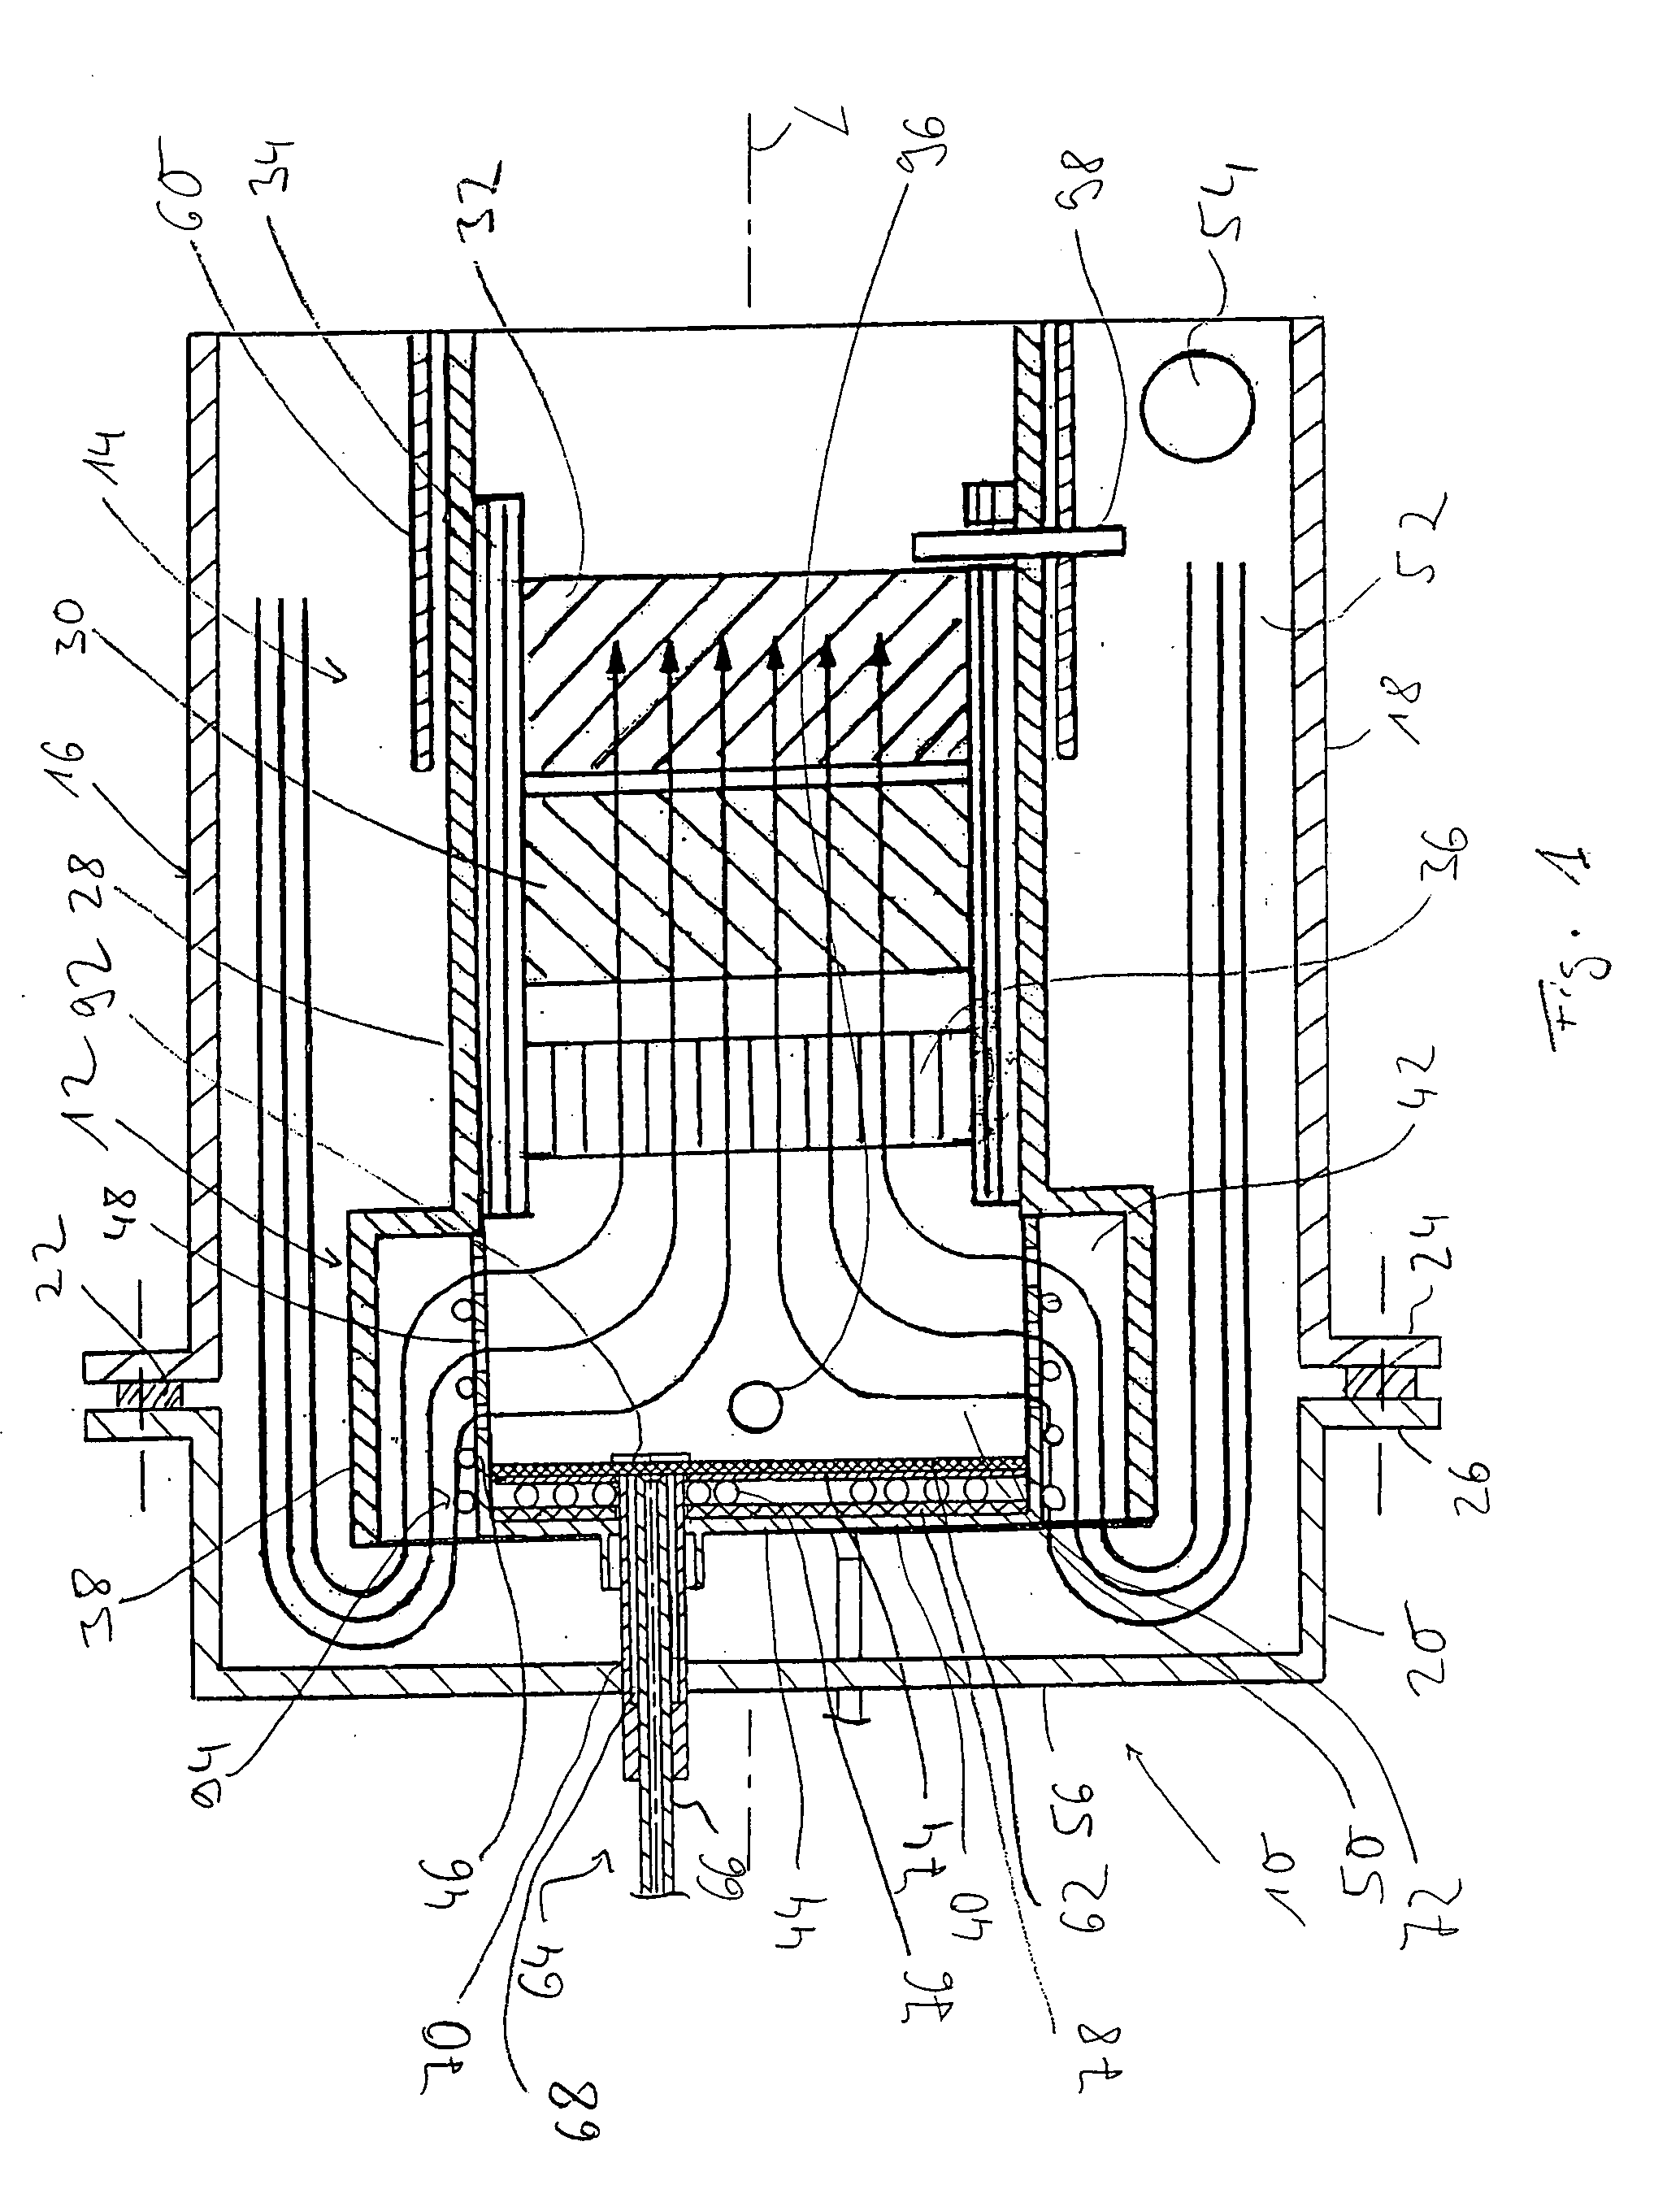 Evaporator arrangement for generating a hydrocarbon vapor/mixed material mixture, especially for a reformer arrangement of a fuel cell system